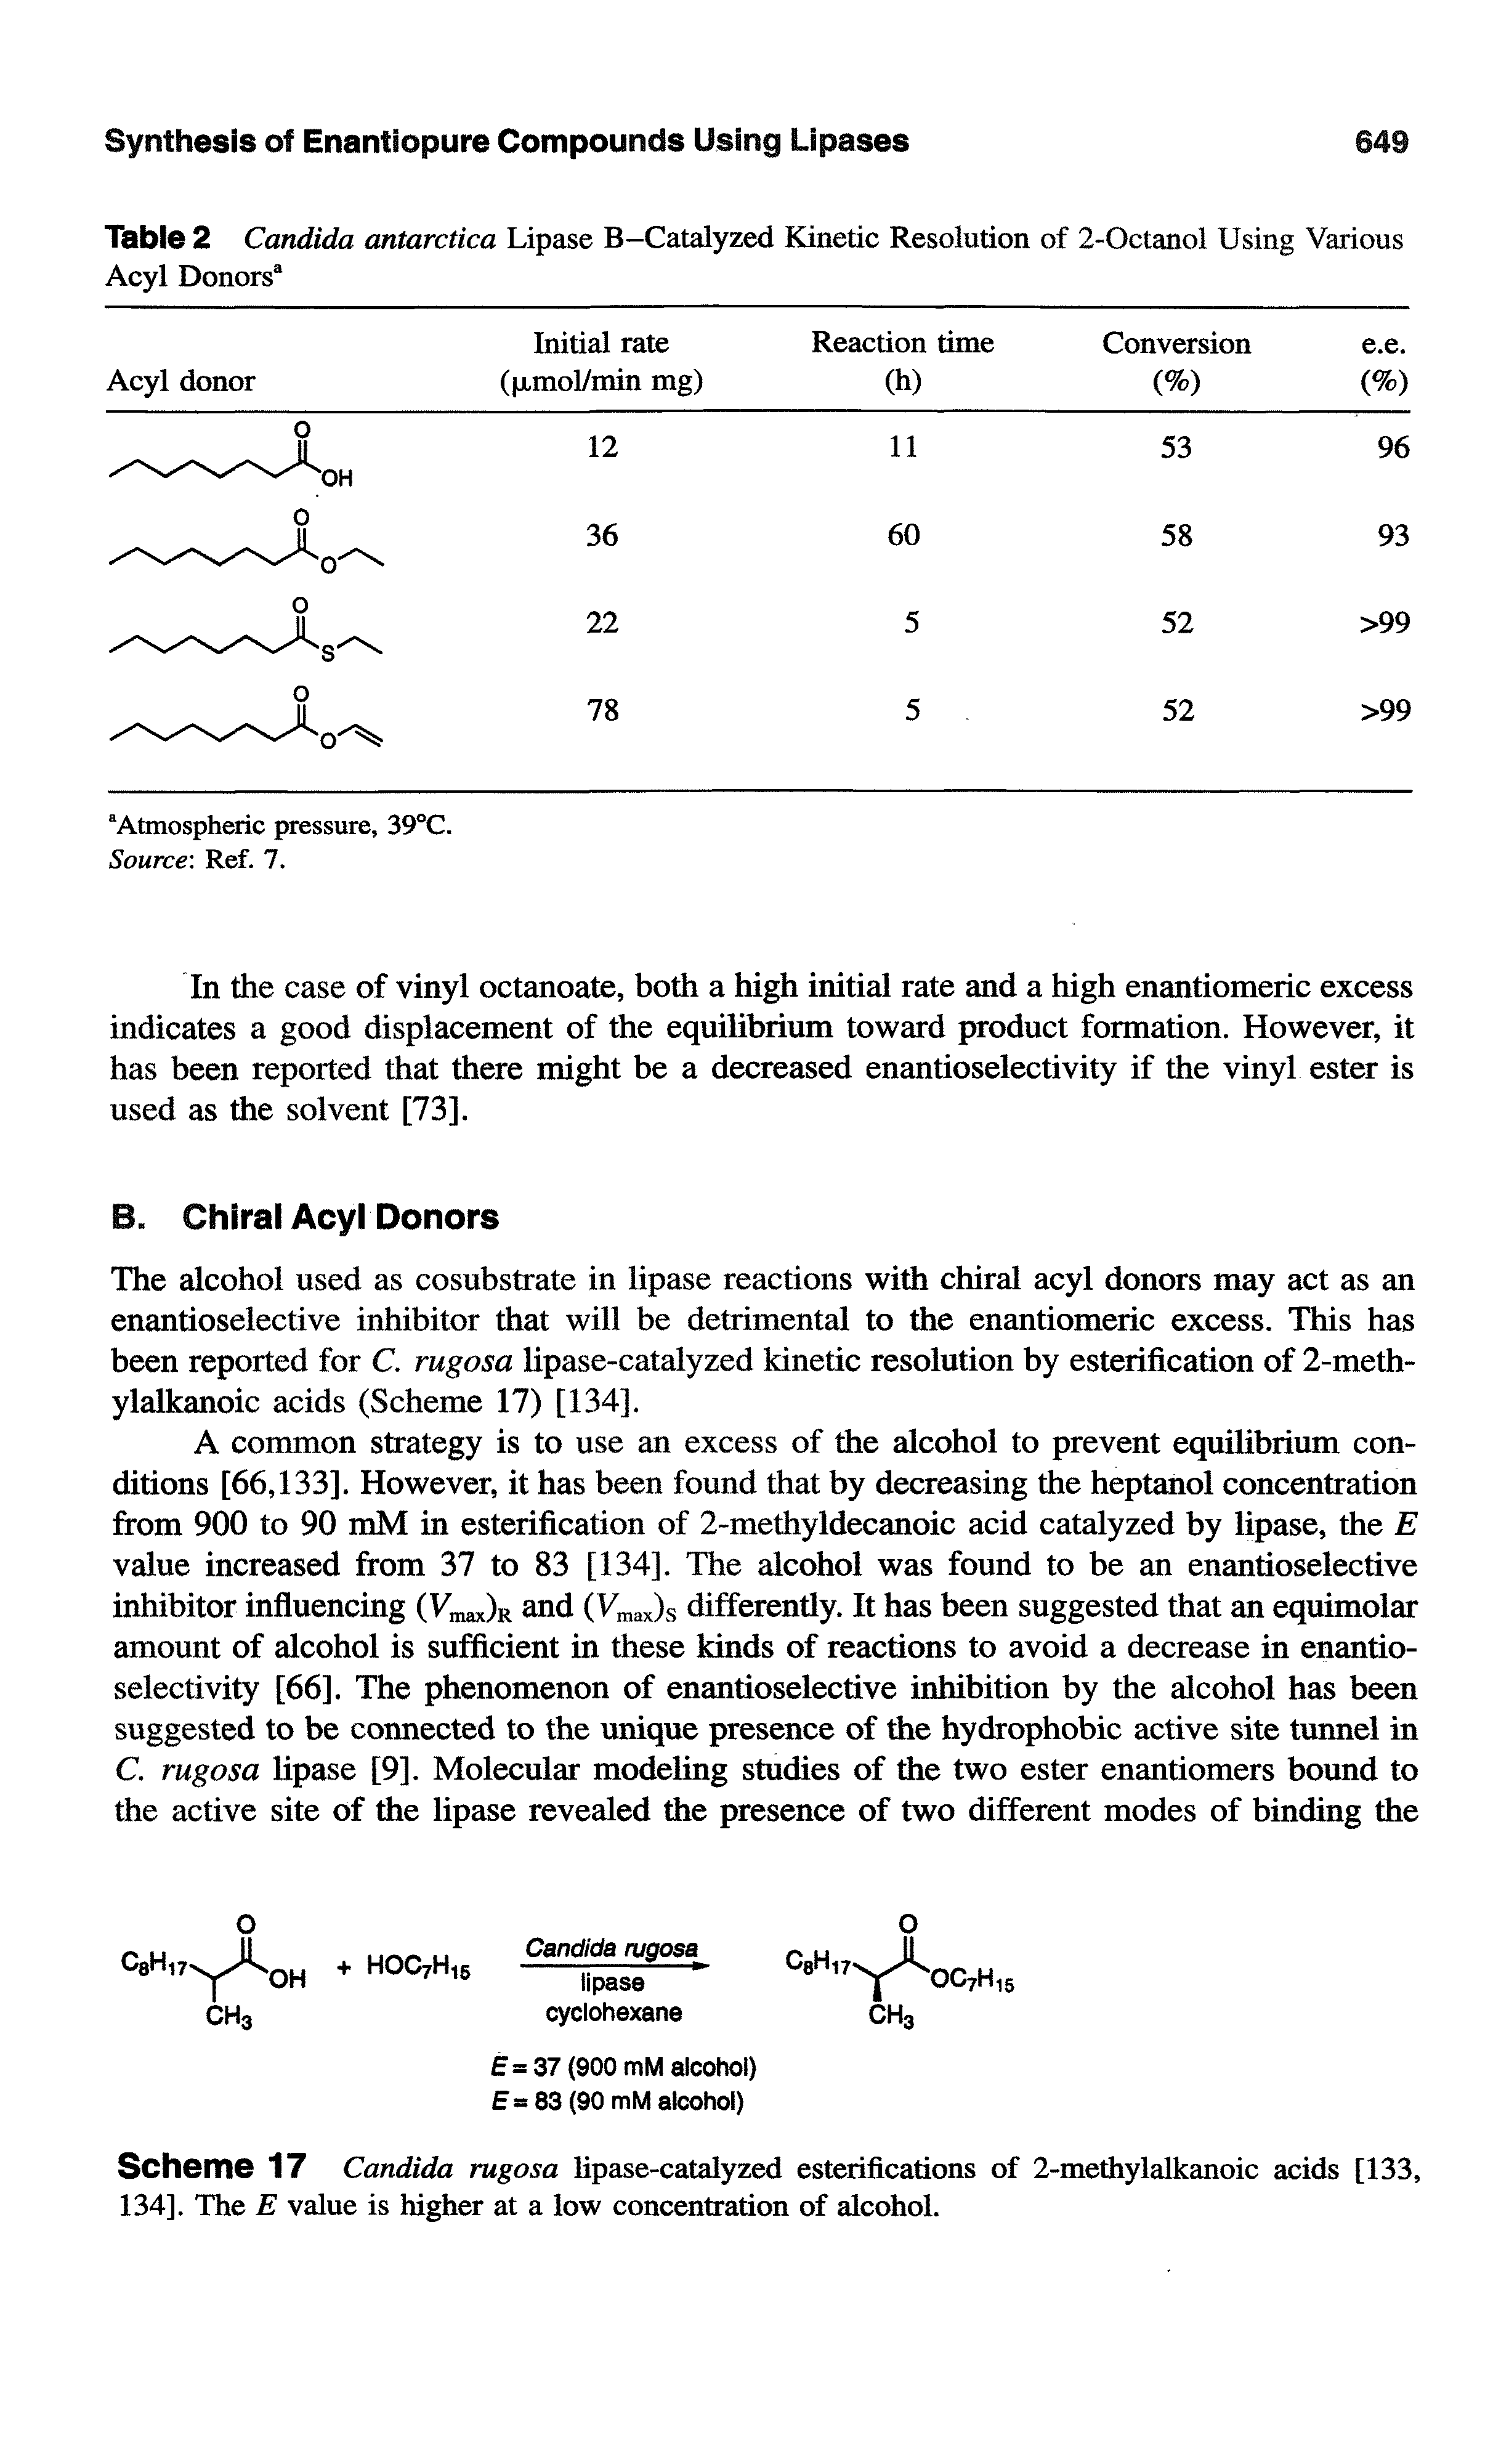 Scheme 17 Candida rugosa lipase-catalyzed esterifications of 2-methylalkanoic acids [133, 134]. The E value is higher at a low concentration of alcohol.